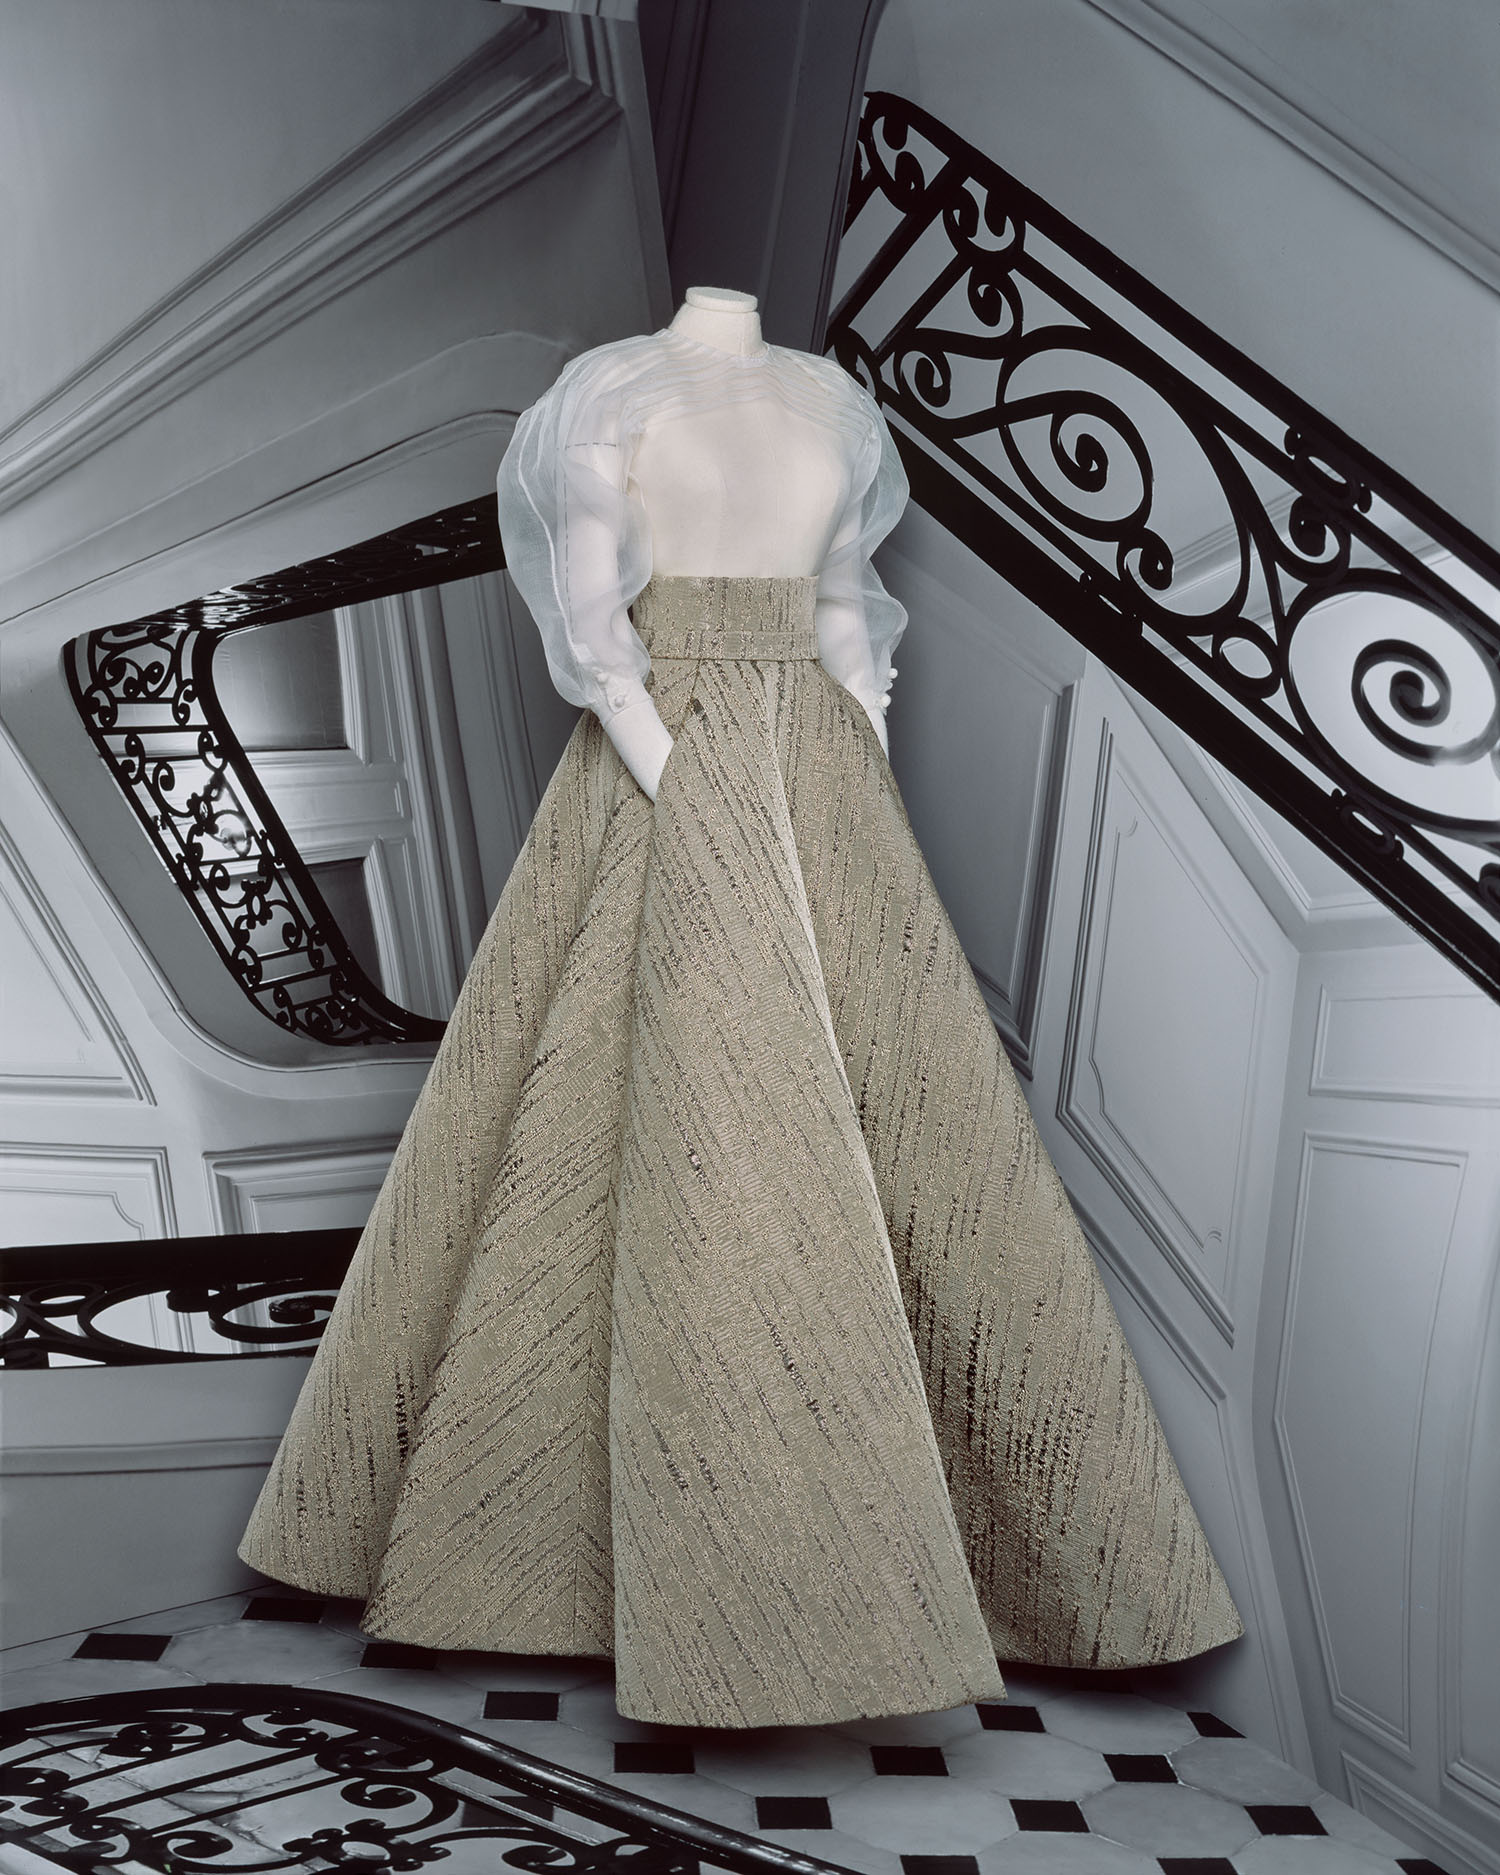 Christian Dior Haute Couture Spring Summer 2019  The Couture Gowns Were  Waiting to See at the Oscars  POPSUGAR Fashion Photo 42